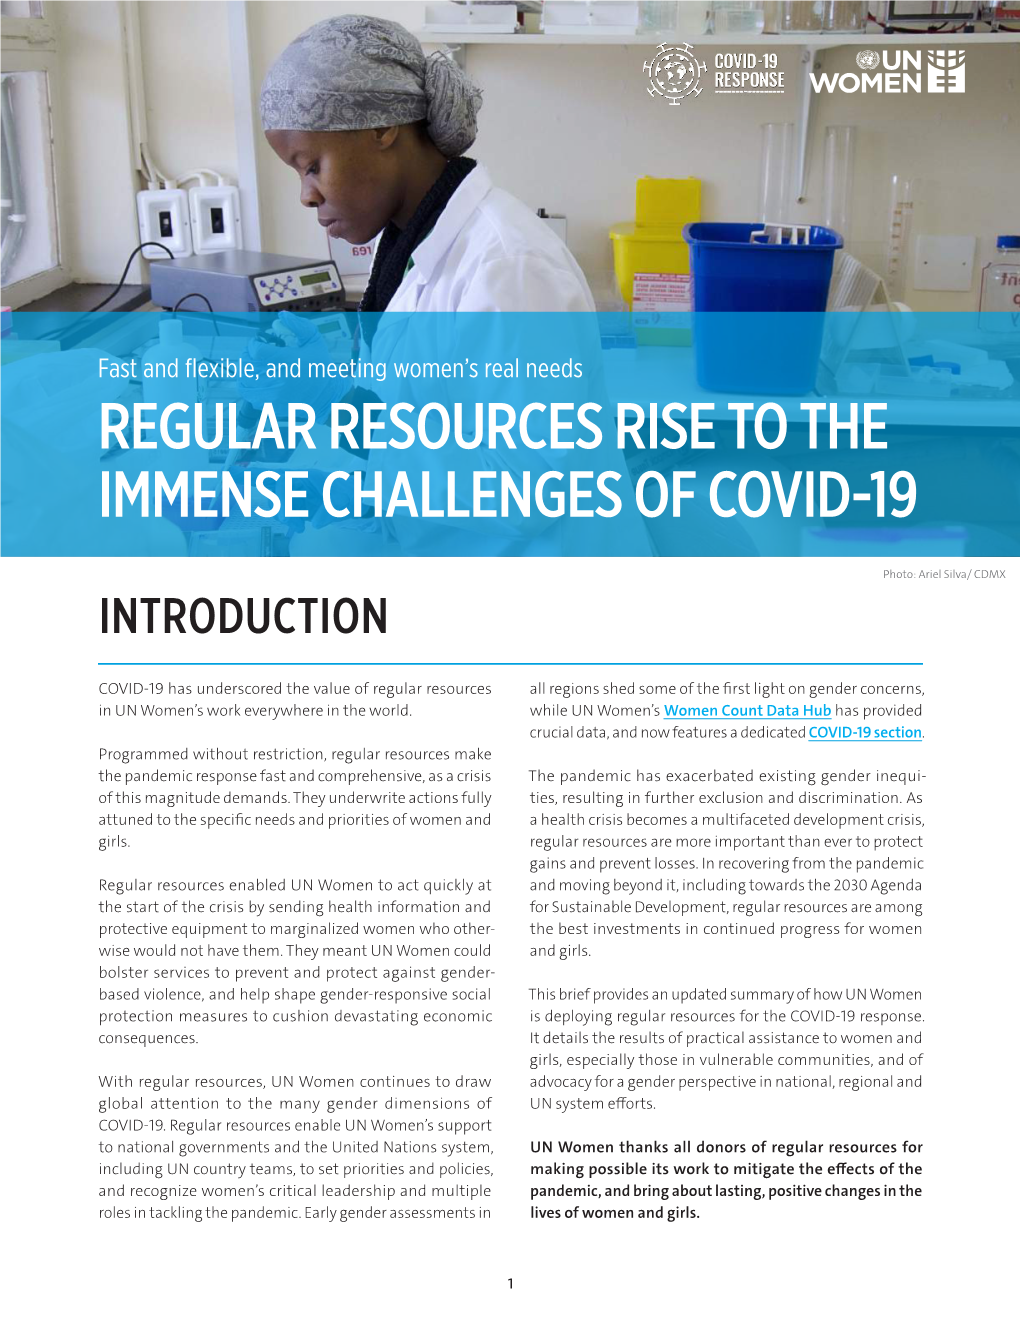 Regular Resources Rise to the Immense Challenges of Covid-19